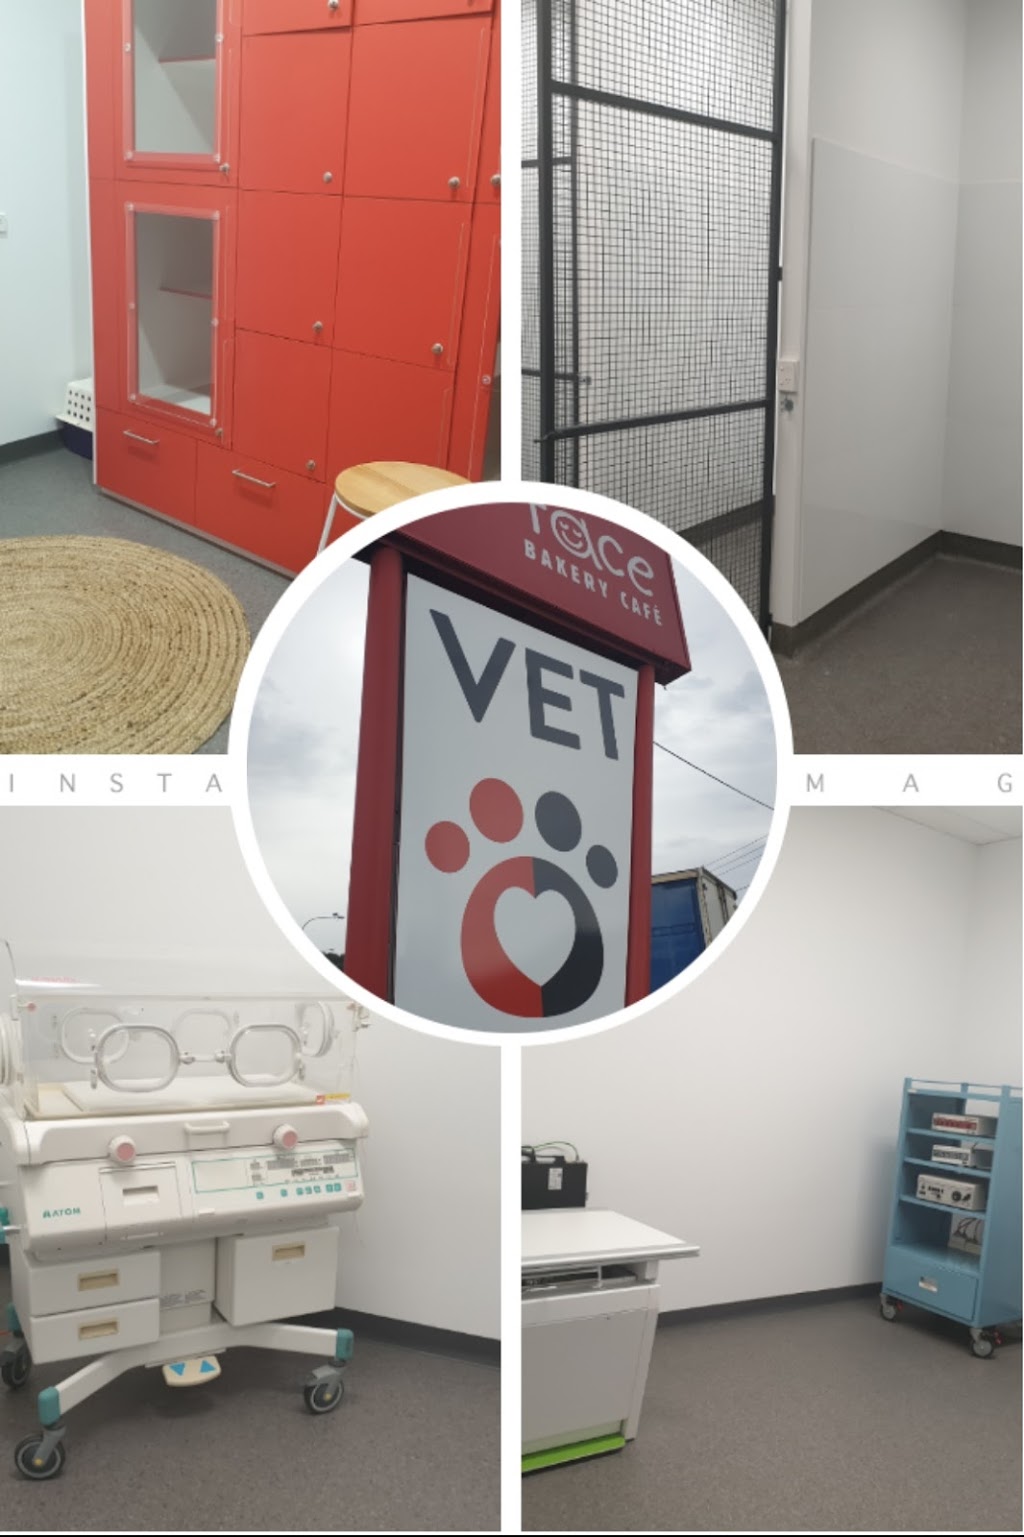 Illawarra Animal Hospital - Figtree | veterinary care | 43A Princes Hwy, Figtree NSW 2525, Australia | 0242139333 OR +61 2 4213 9333